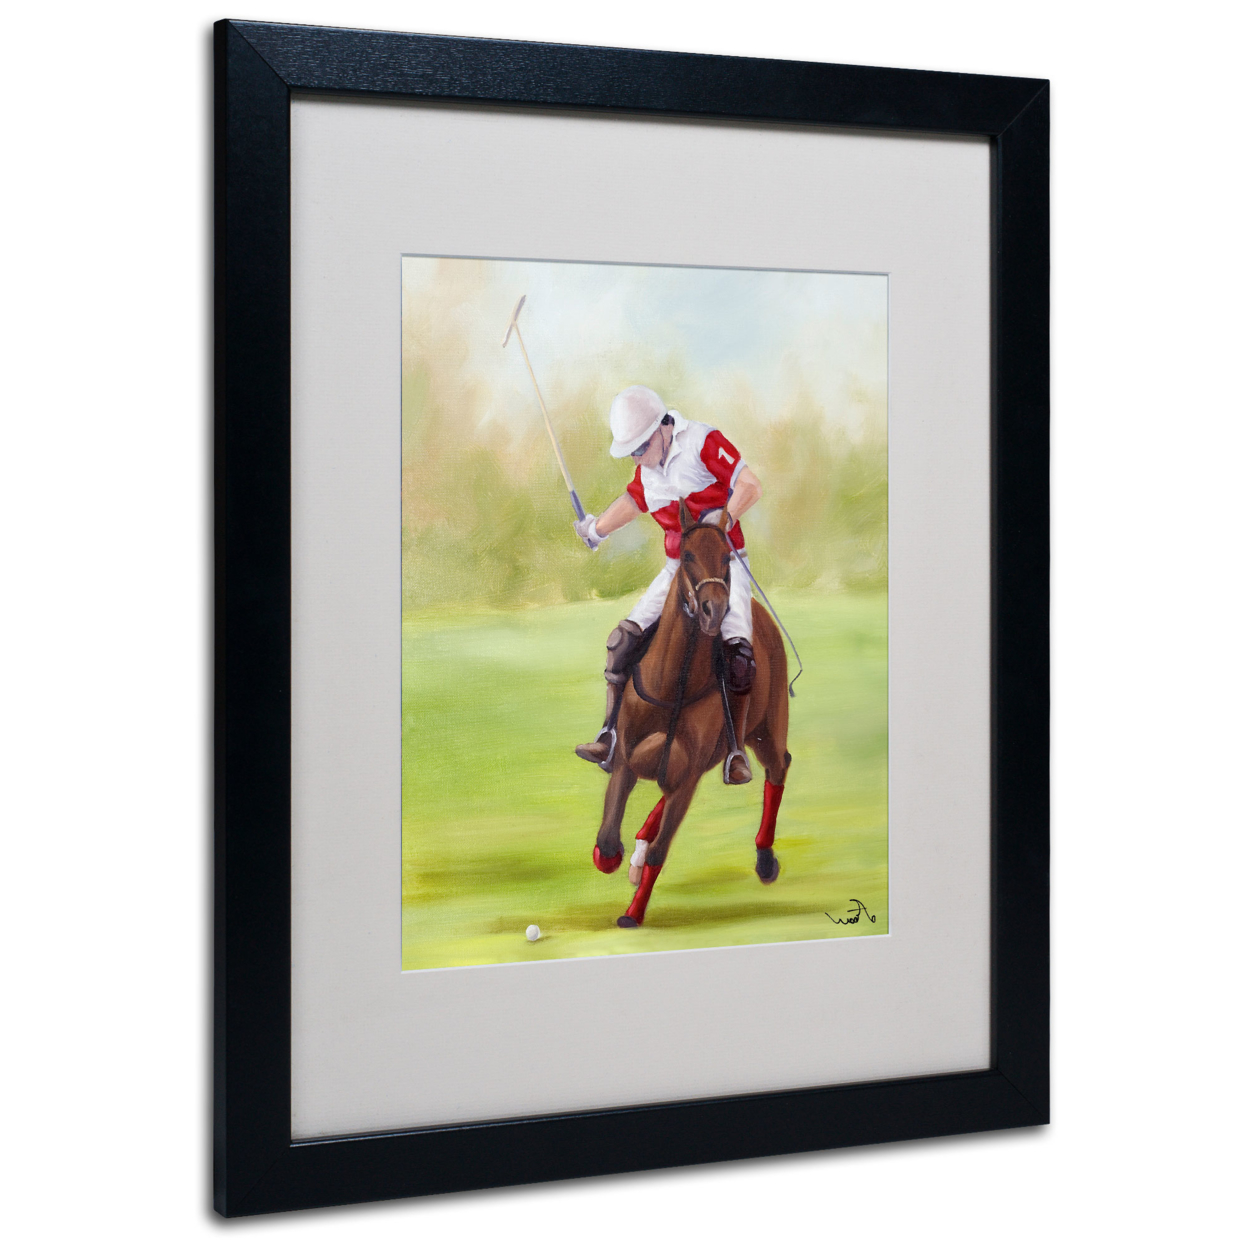 Michelle Moate 'Horse Of Sport I' Black Wooden Framed Art 18 X 22 Inches